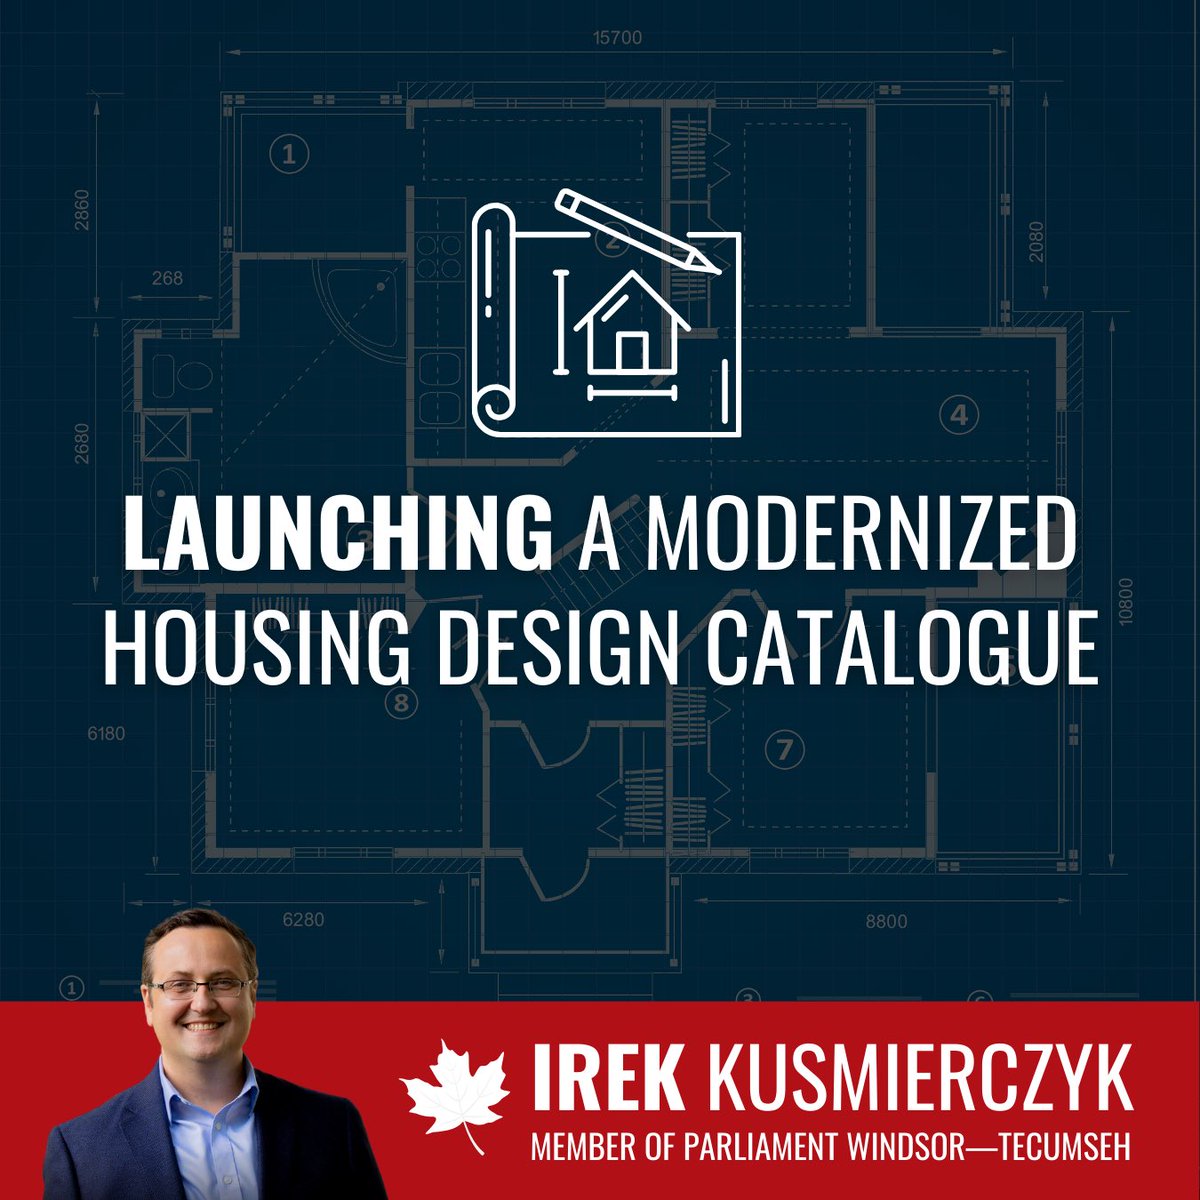 We are launching a modernized housing design catalogue to get more homes built faster 🏡

This will standardize up to 50 cost-effective and liveable home blueprints that will streamline and accelerate construction timelines!

Learn more:
infrastructure.gc.ca/housing-logeme…